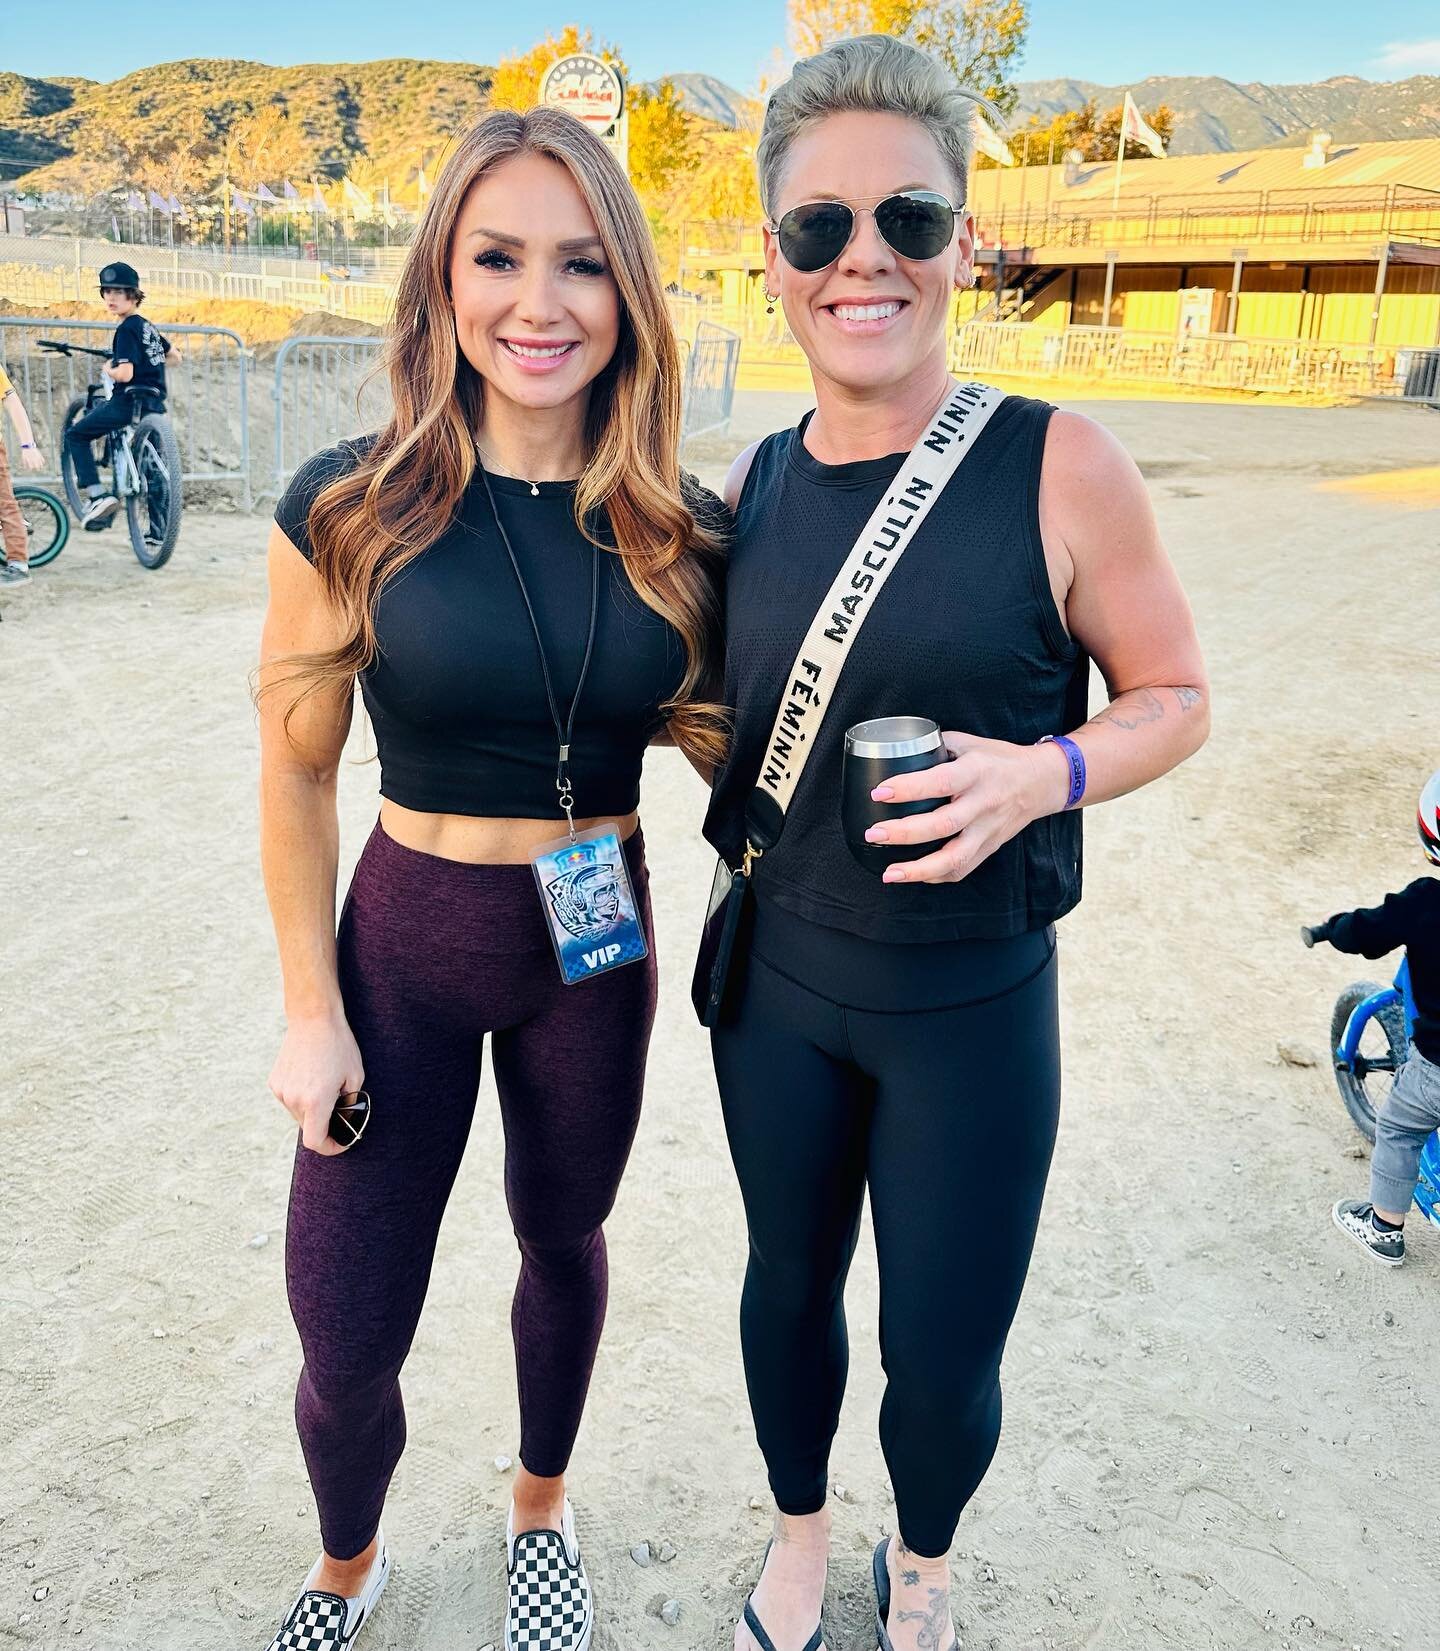 💗is my fav!!

Really enjoying my time away this weekend, with new people, new experiences, and new memories 🥰

Hope your weekend is just as fantastic. 

xoxo- Breanne
.
.
.
#dayinthedirt #fasthousemotocrew #braap #motolife #thanksgivingweekend